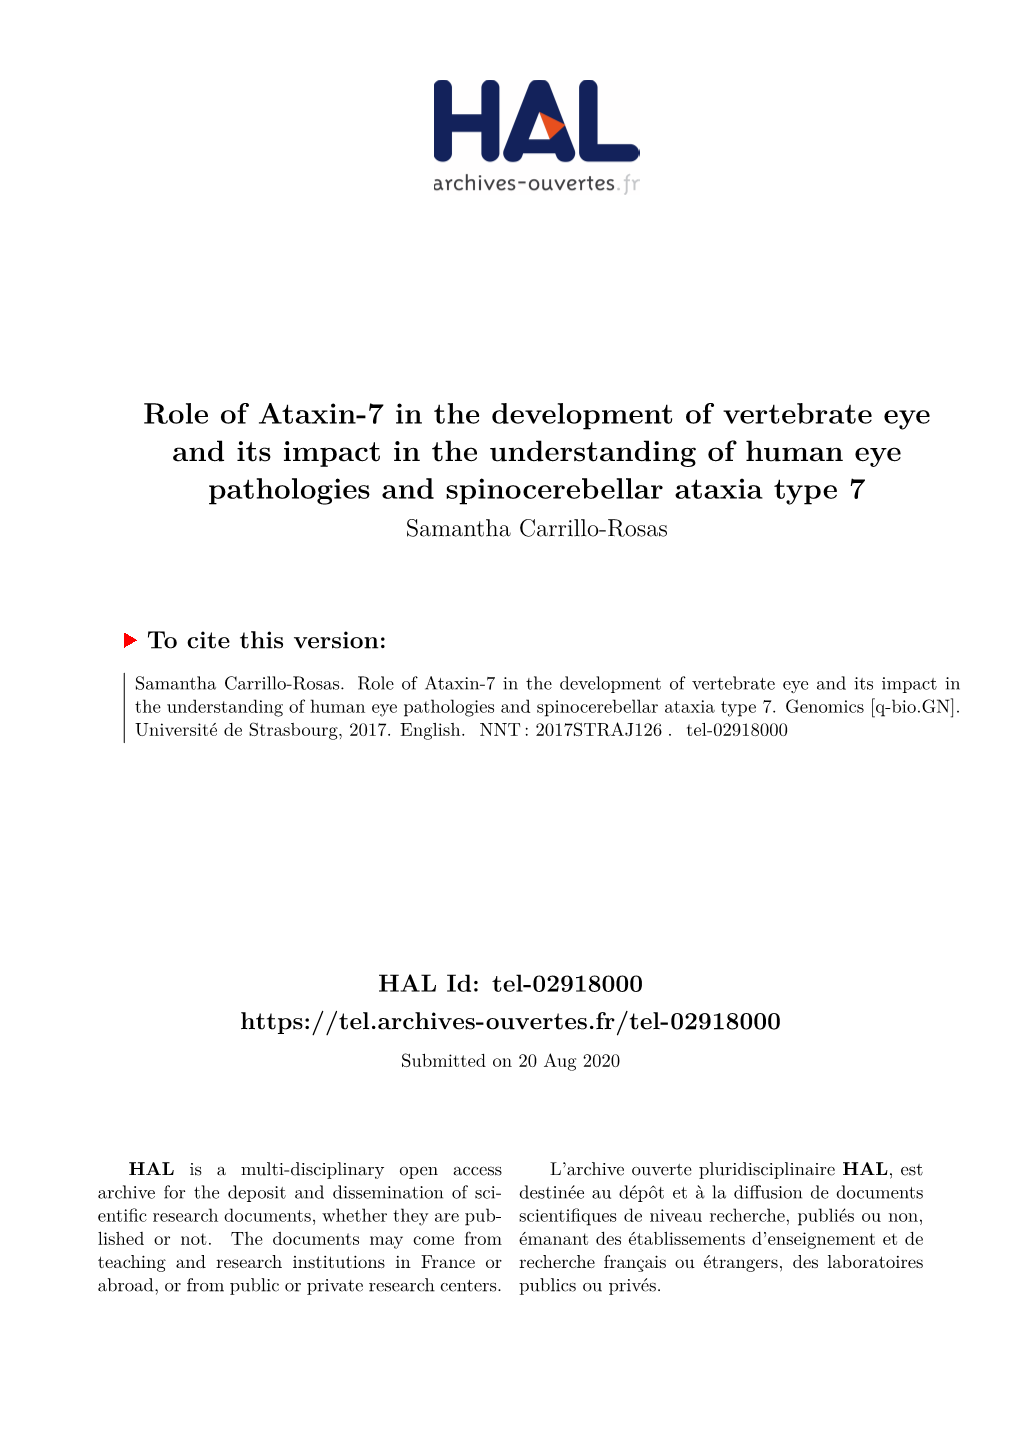 Role of Ataxin-7 in the Development of Vertebrate Eye and Its Impact in the Understanding of Human Eye Pathologies and Spinocere